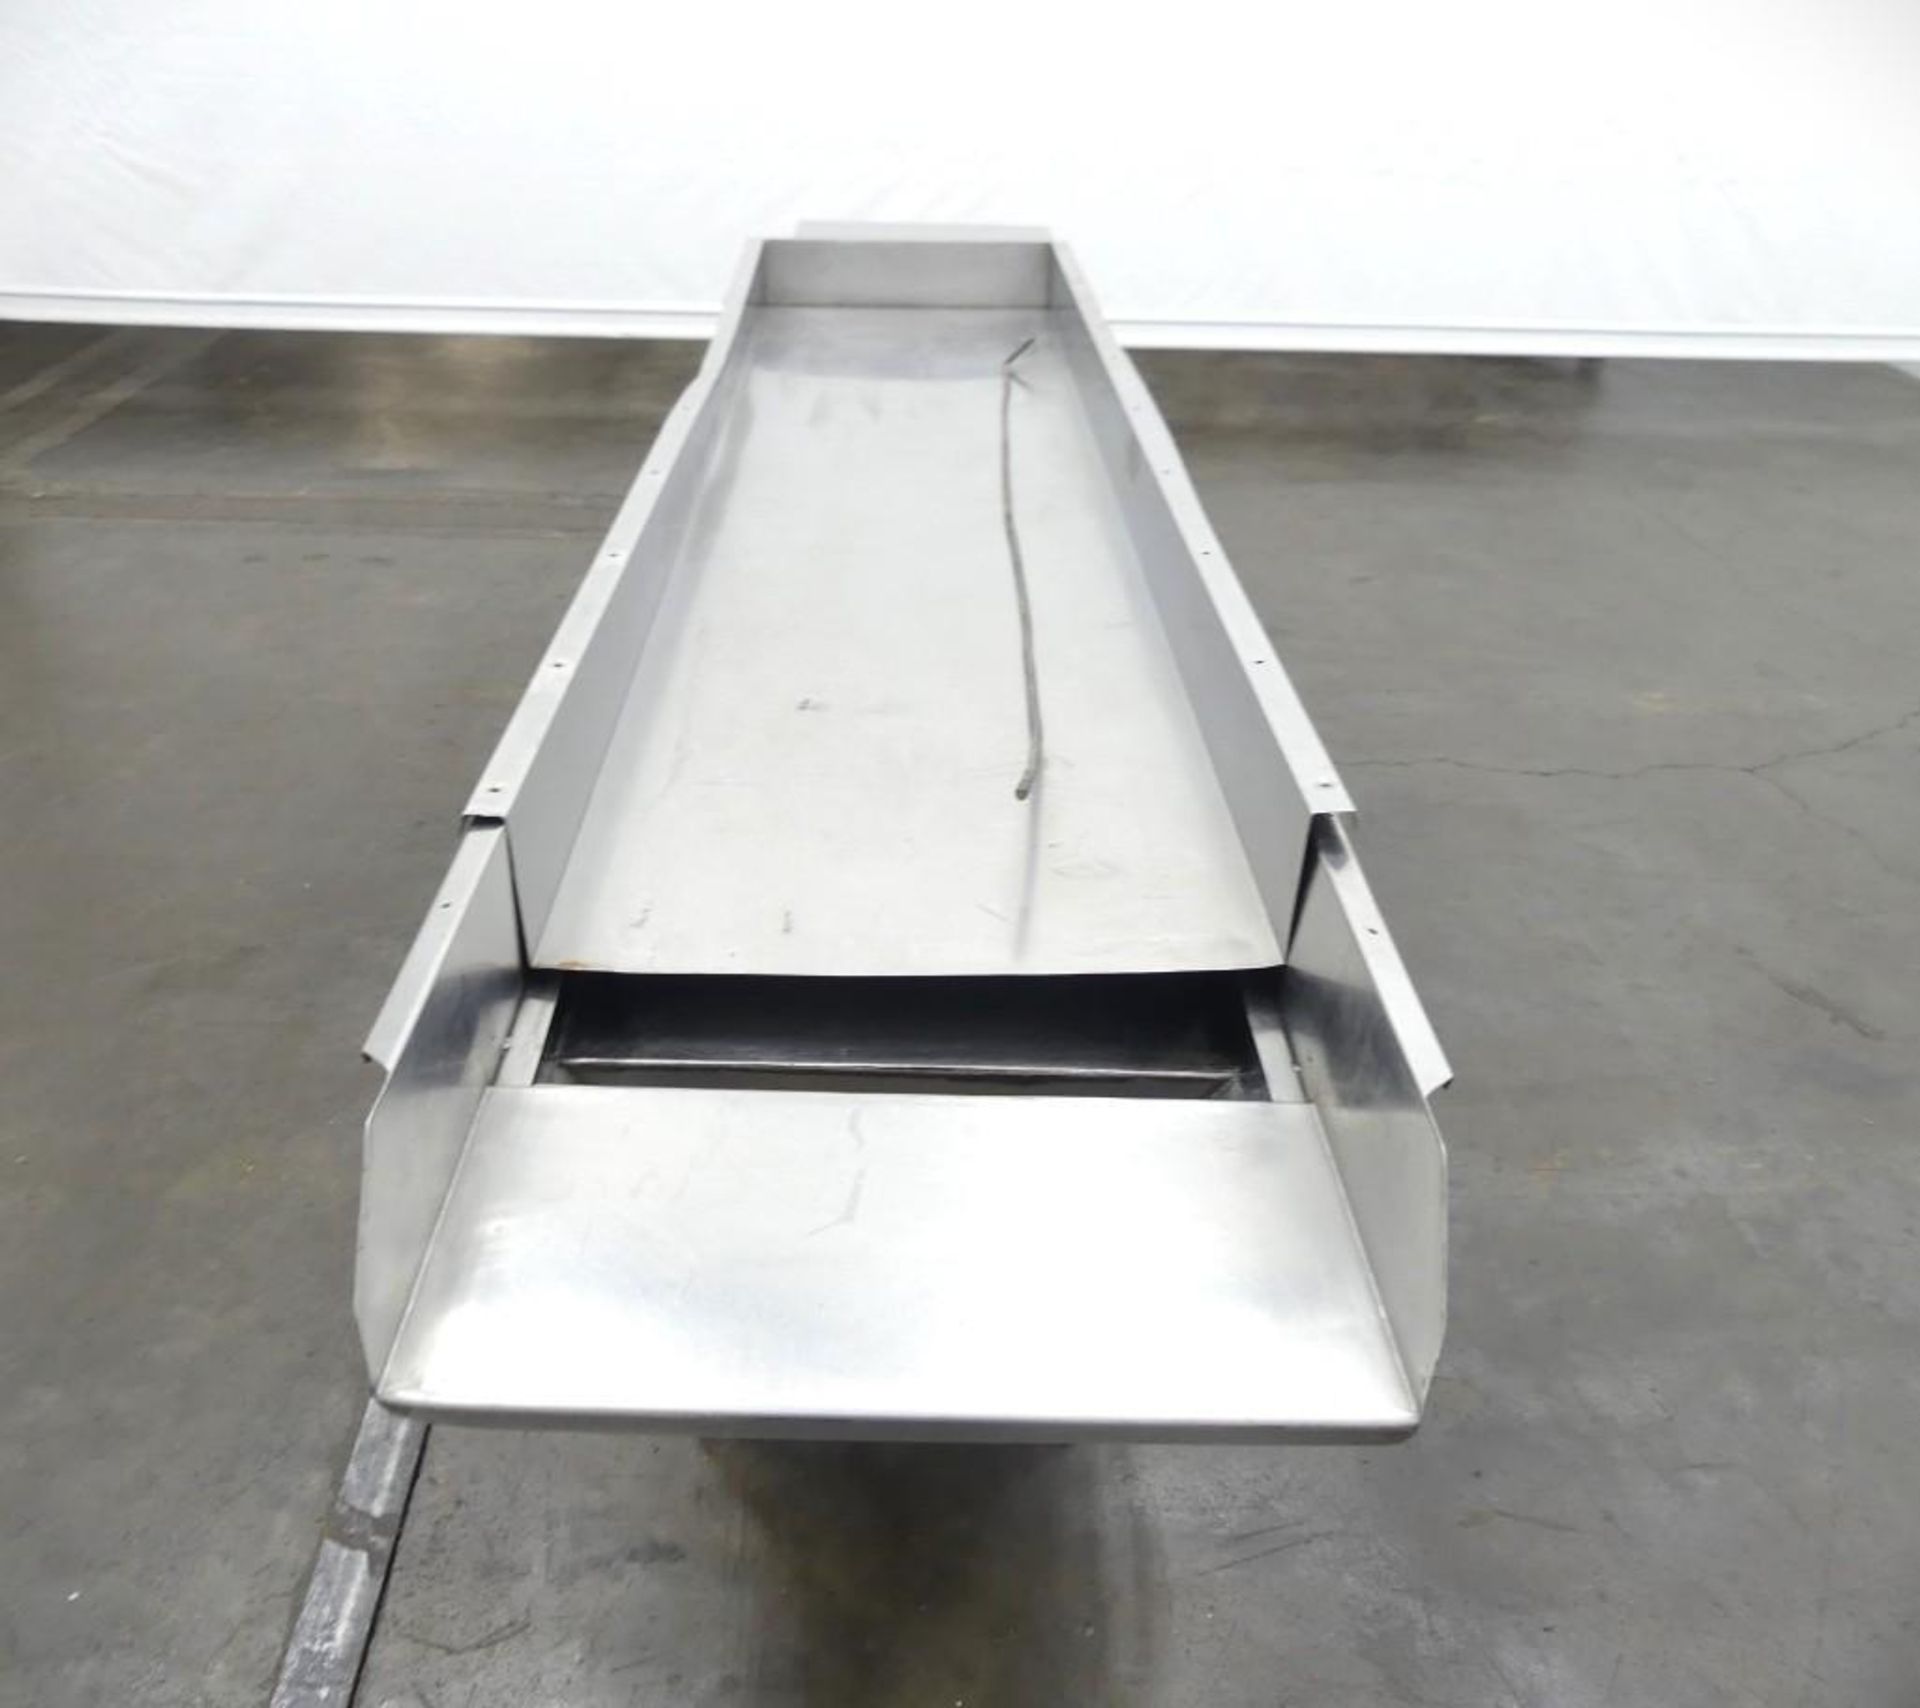 8'L x 24"W Linear Vibratory Feeder - Image 4 of 23